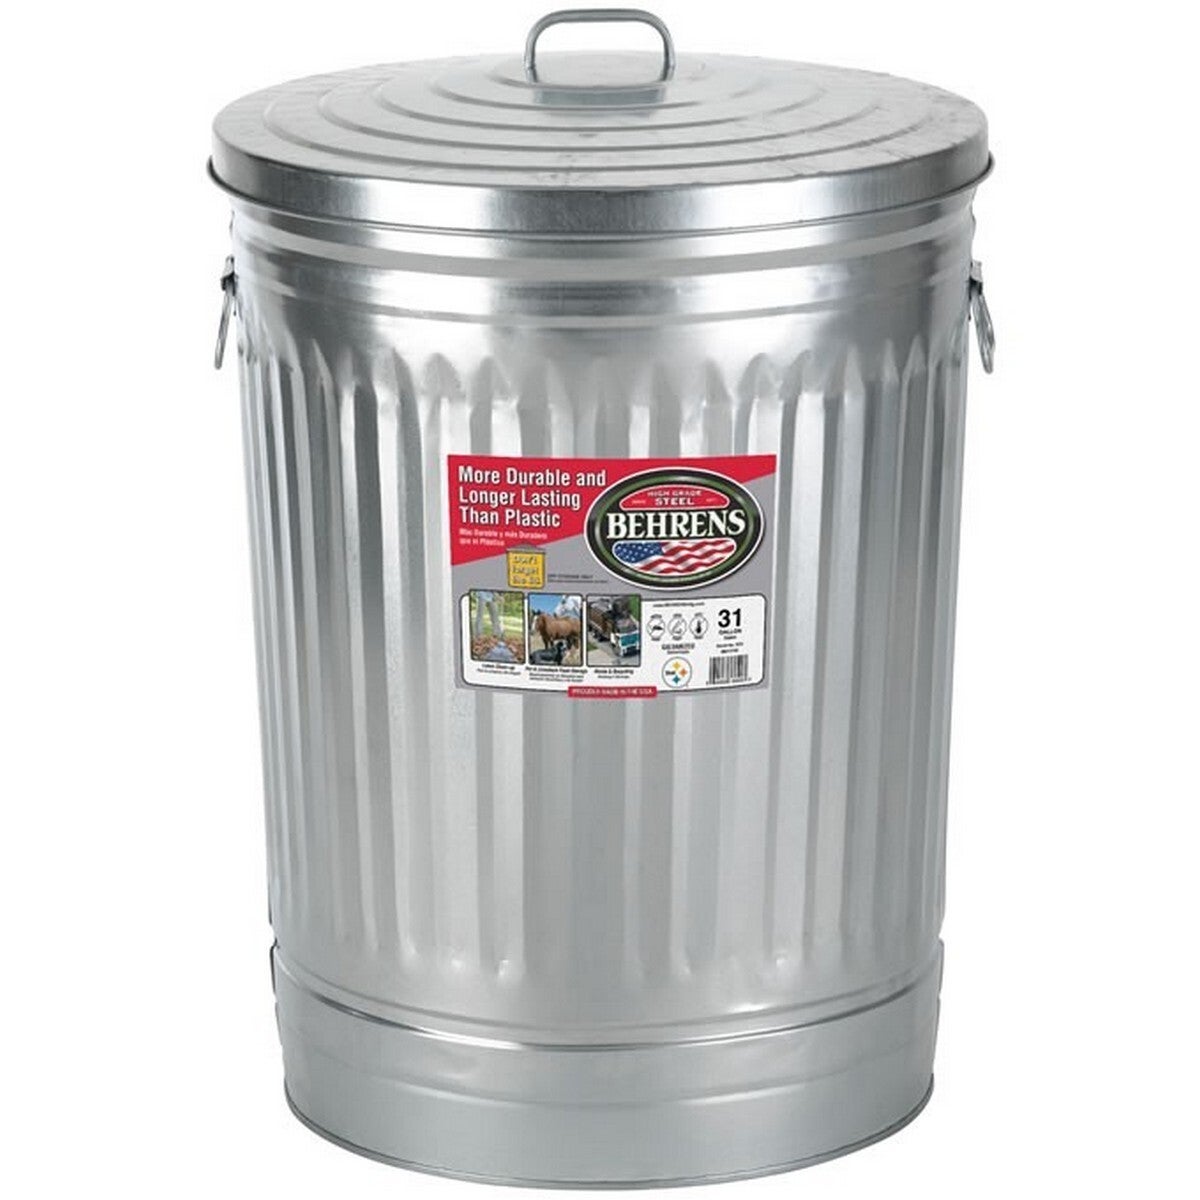 Behrens 31 Gal. Galvanized Steel Utility/Trash Can with Lid